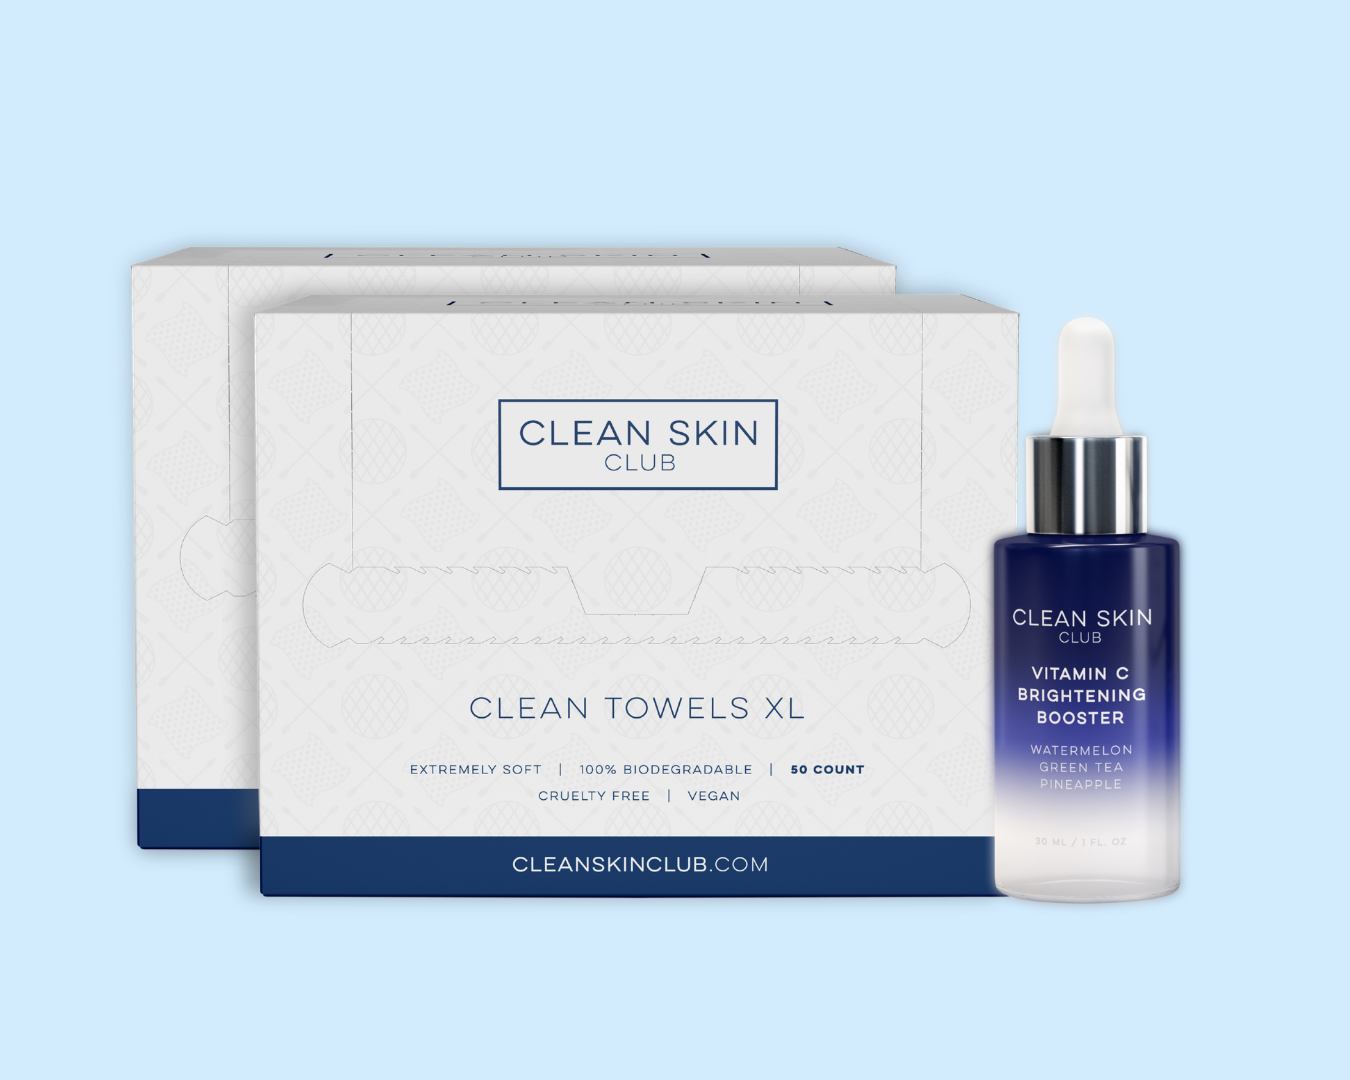 2 Clean Towels XL + 1 Skincare Product